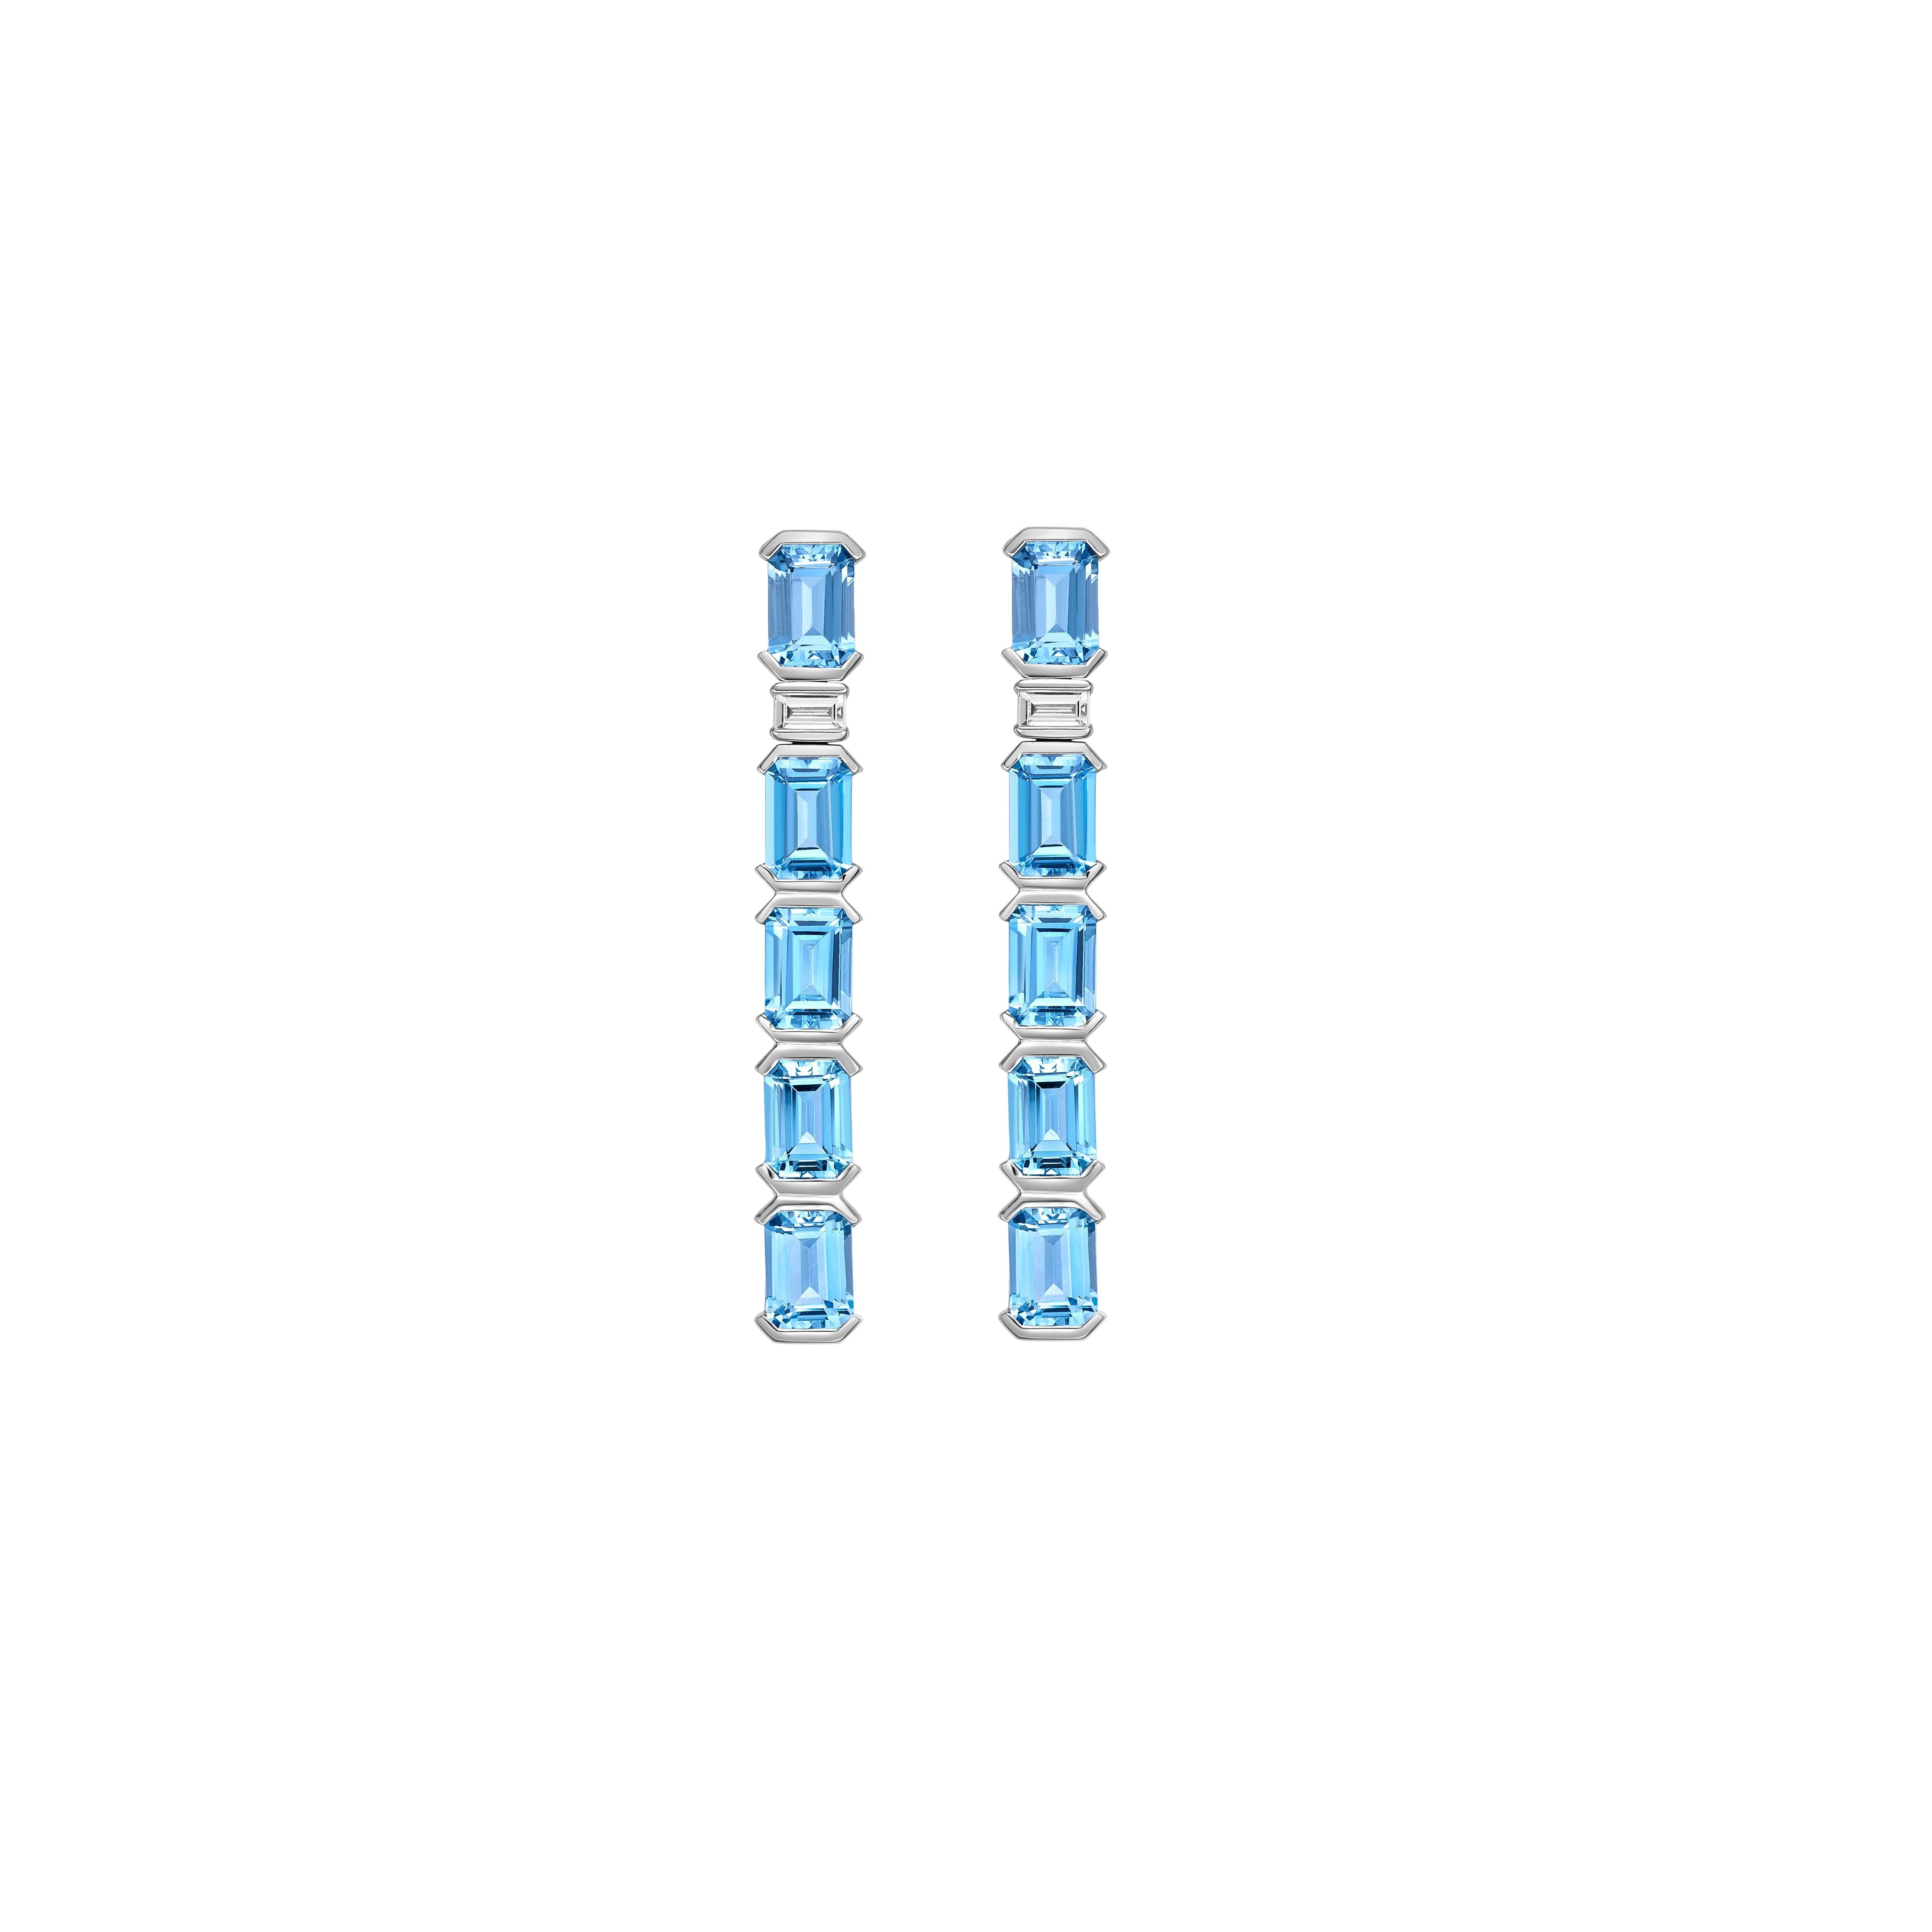 Contemporary 8.63 Carat Aquamarine Drop Earrings in 18Karat White Gold with White Diamond. For Sale